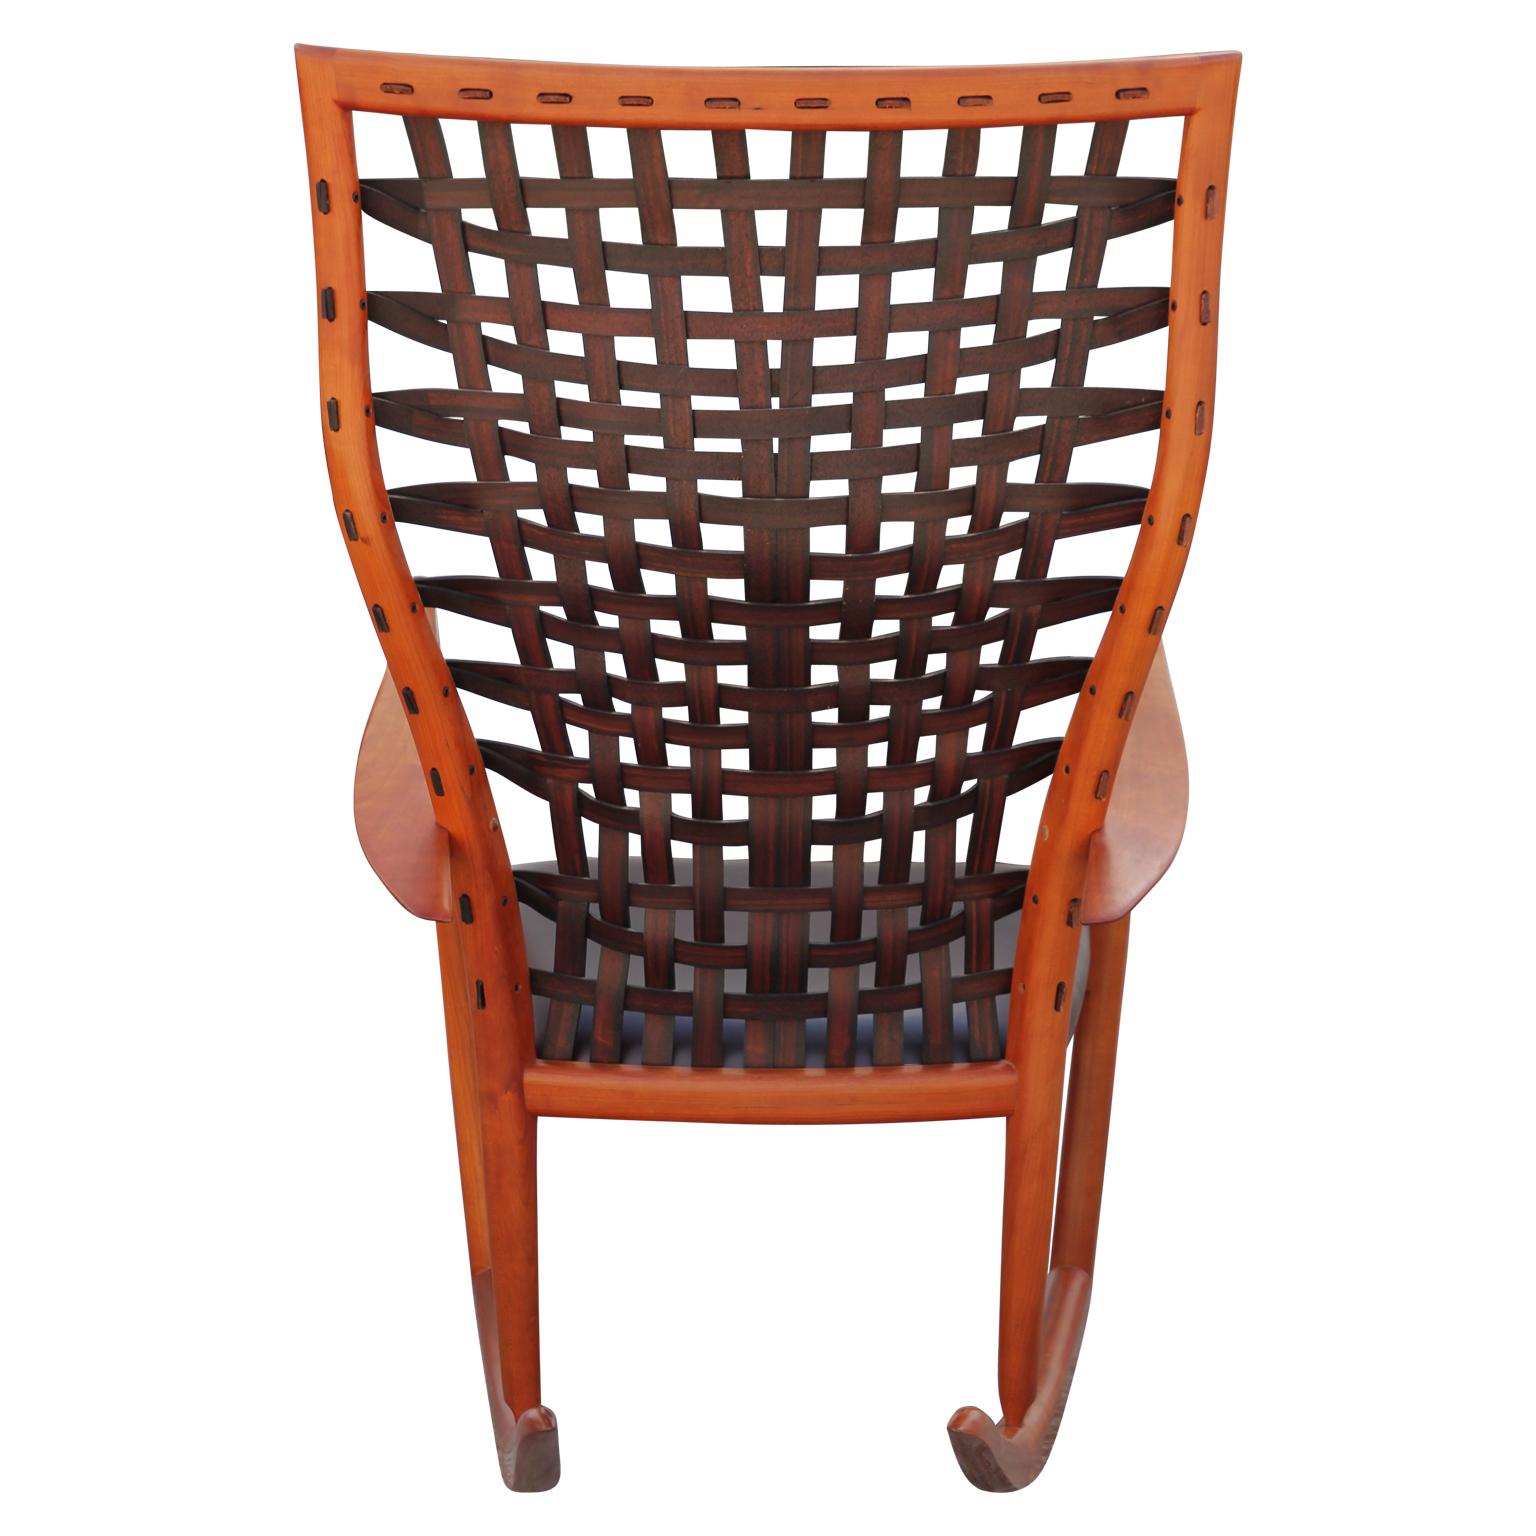 Sculptural Modern Handmade Cherrywood and Woven Leather Rocking Chair (Moderne)